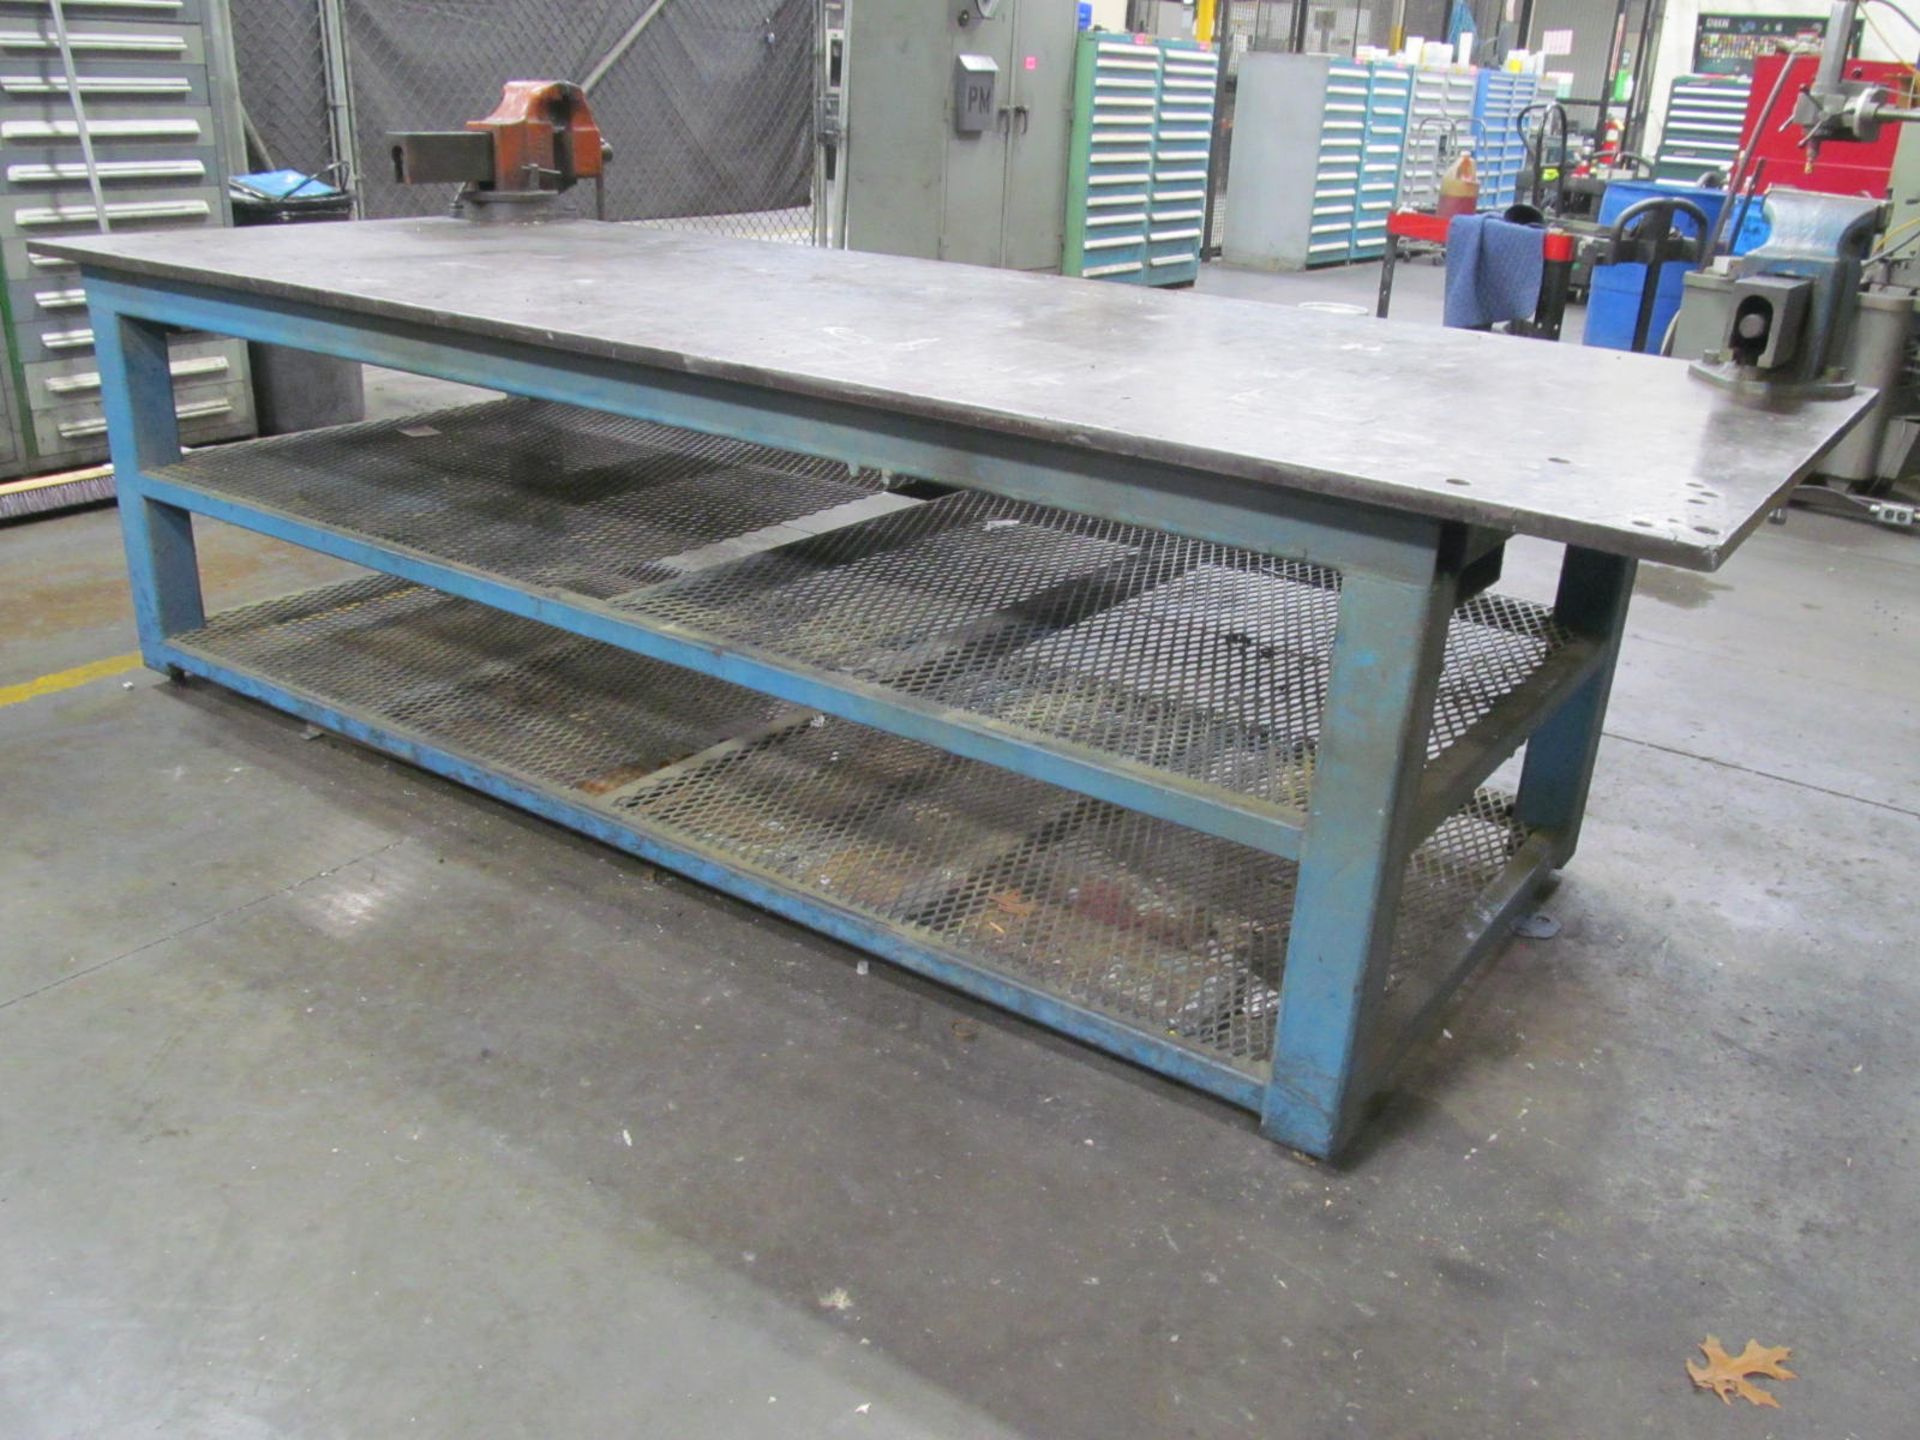 48" x 120" Steel Table w/ 1" Thick Top (Vises Not Included)